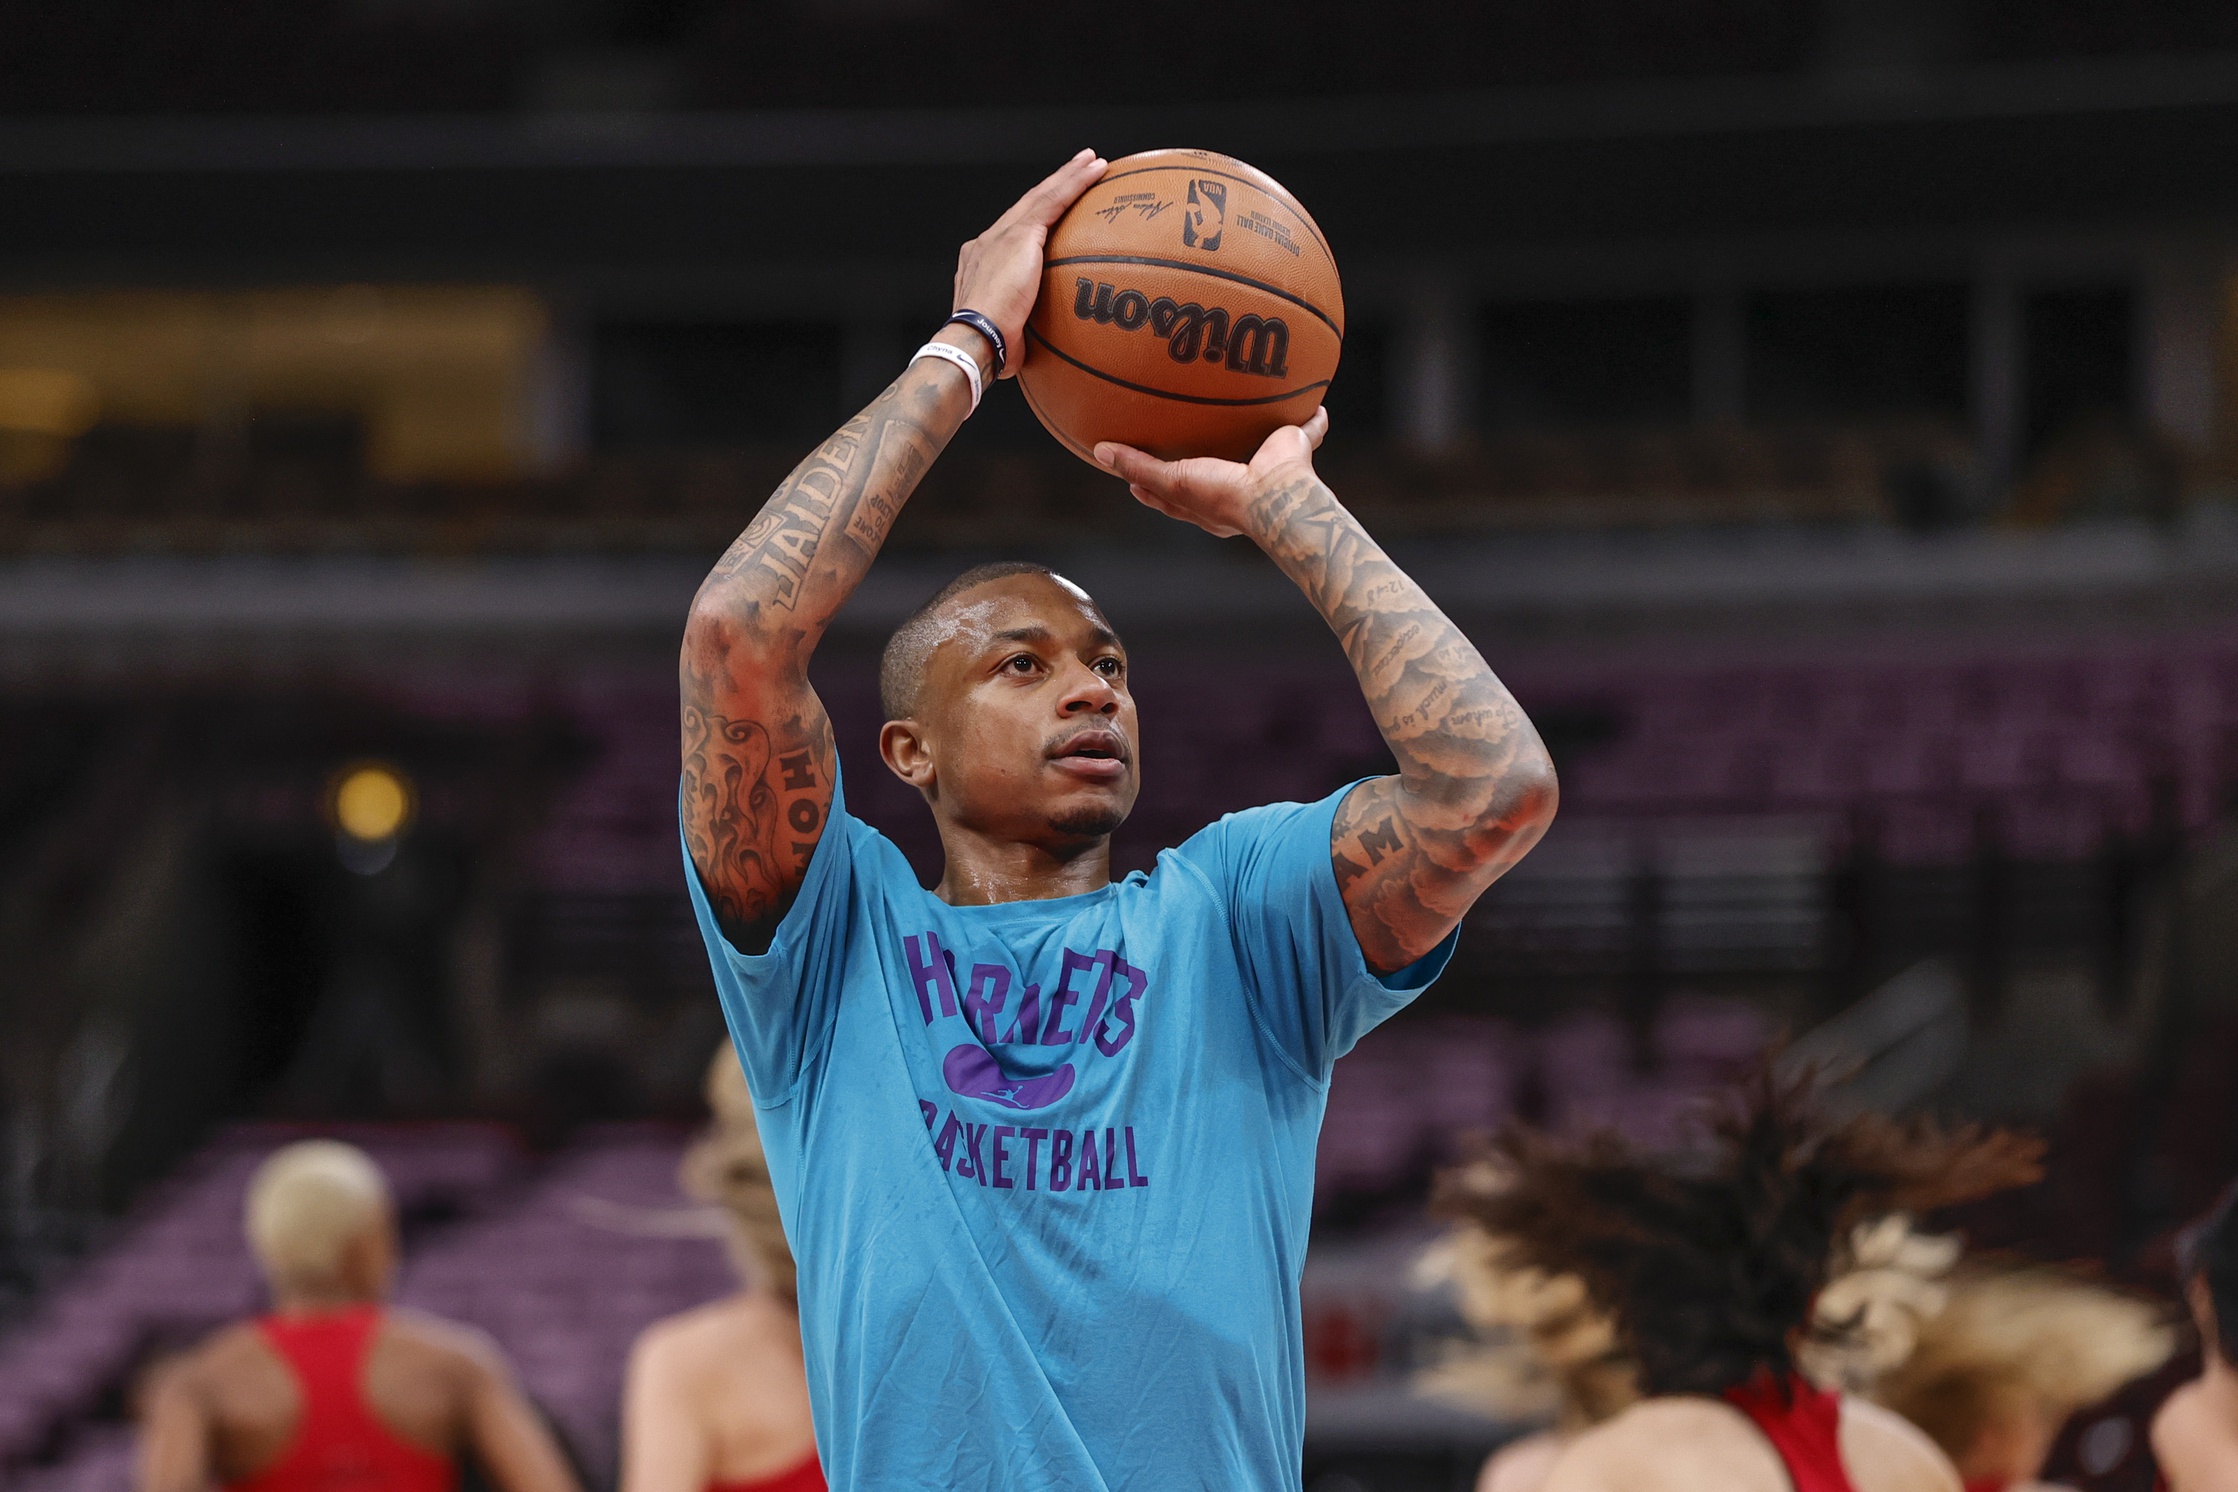 Charlotte Hornets guard Isaiah Thomas (4) warms up before an NBA game against the Chicago Bulls at United Center.